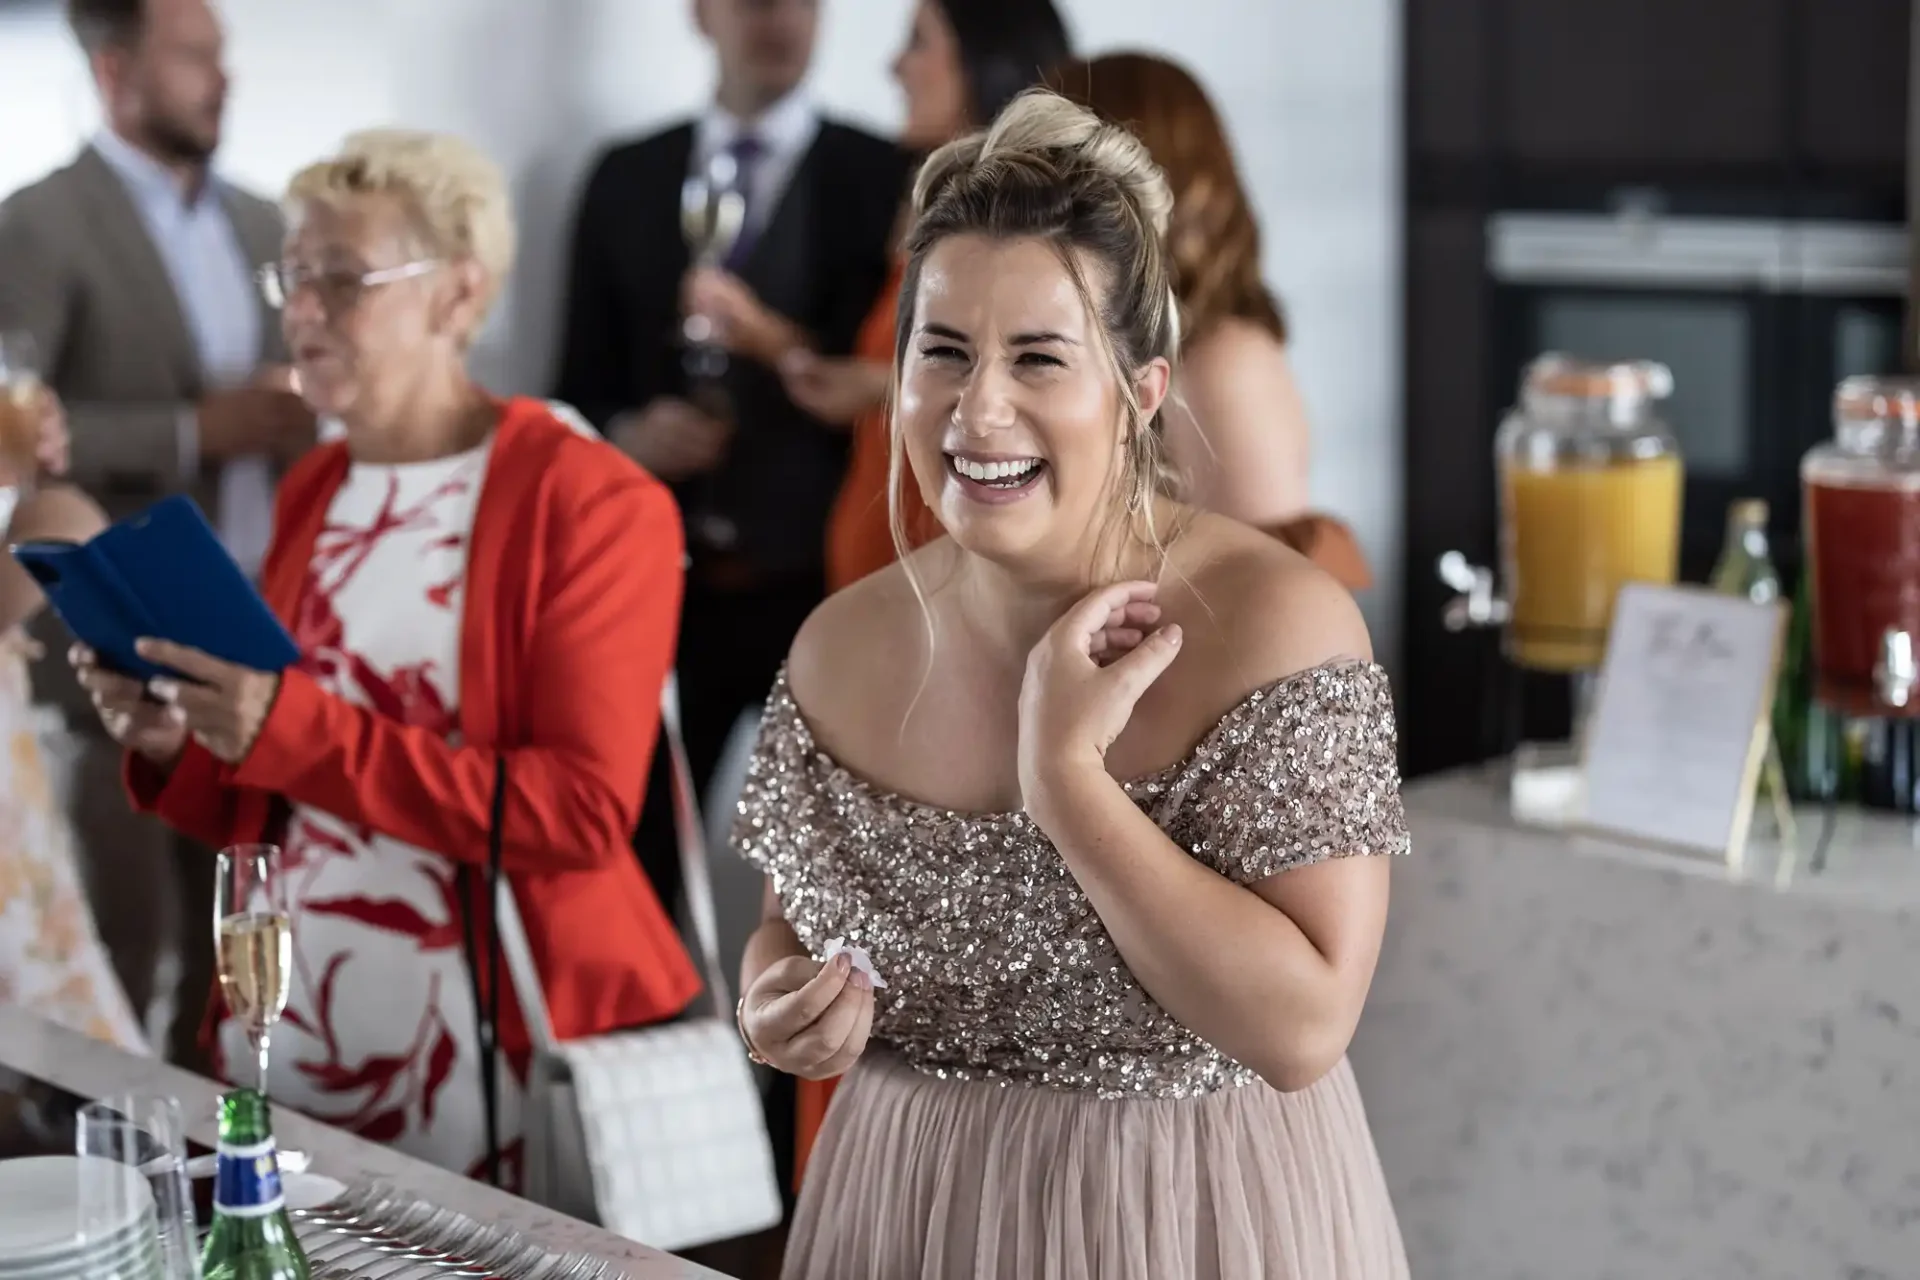 A woman in a glittery dress laughs joyfully at a social event, holding a clutch, with other guests and a drink station in the background.